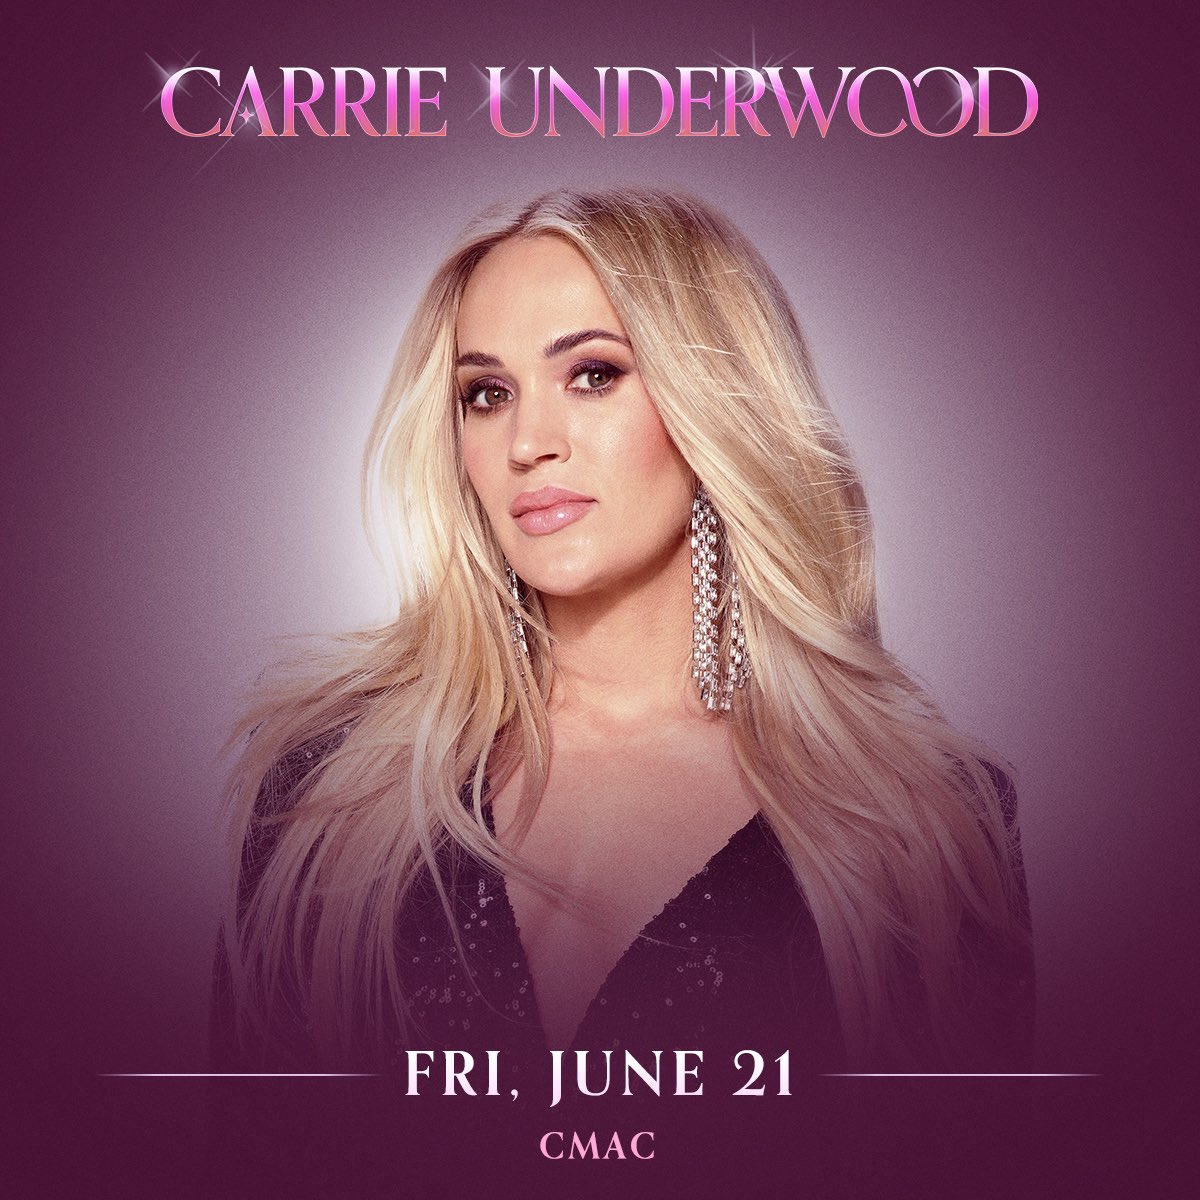 💖 ON SALE NOW 💖 Carrie Underwood at CMAC on Friday, June 21! Purchase tickets here: ticketmaster.com/event/00006089…